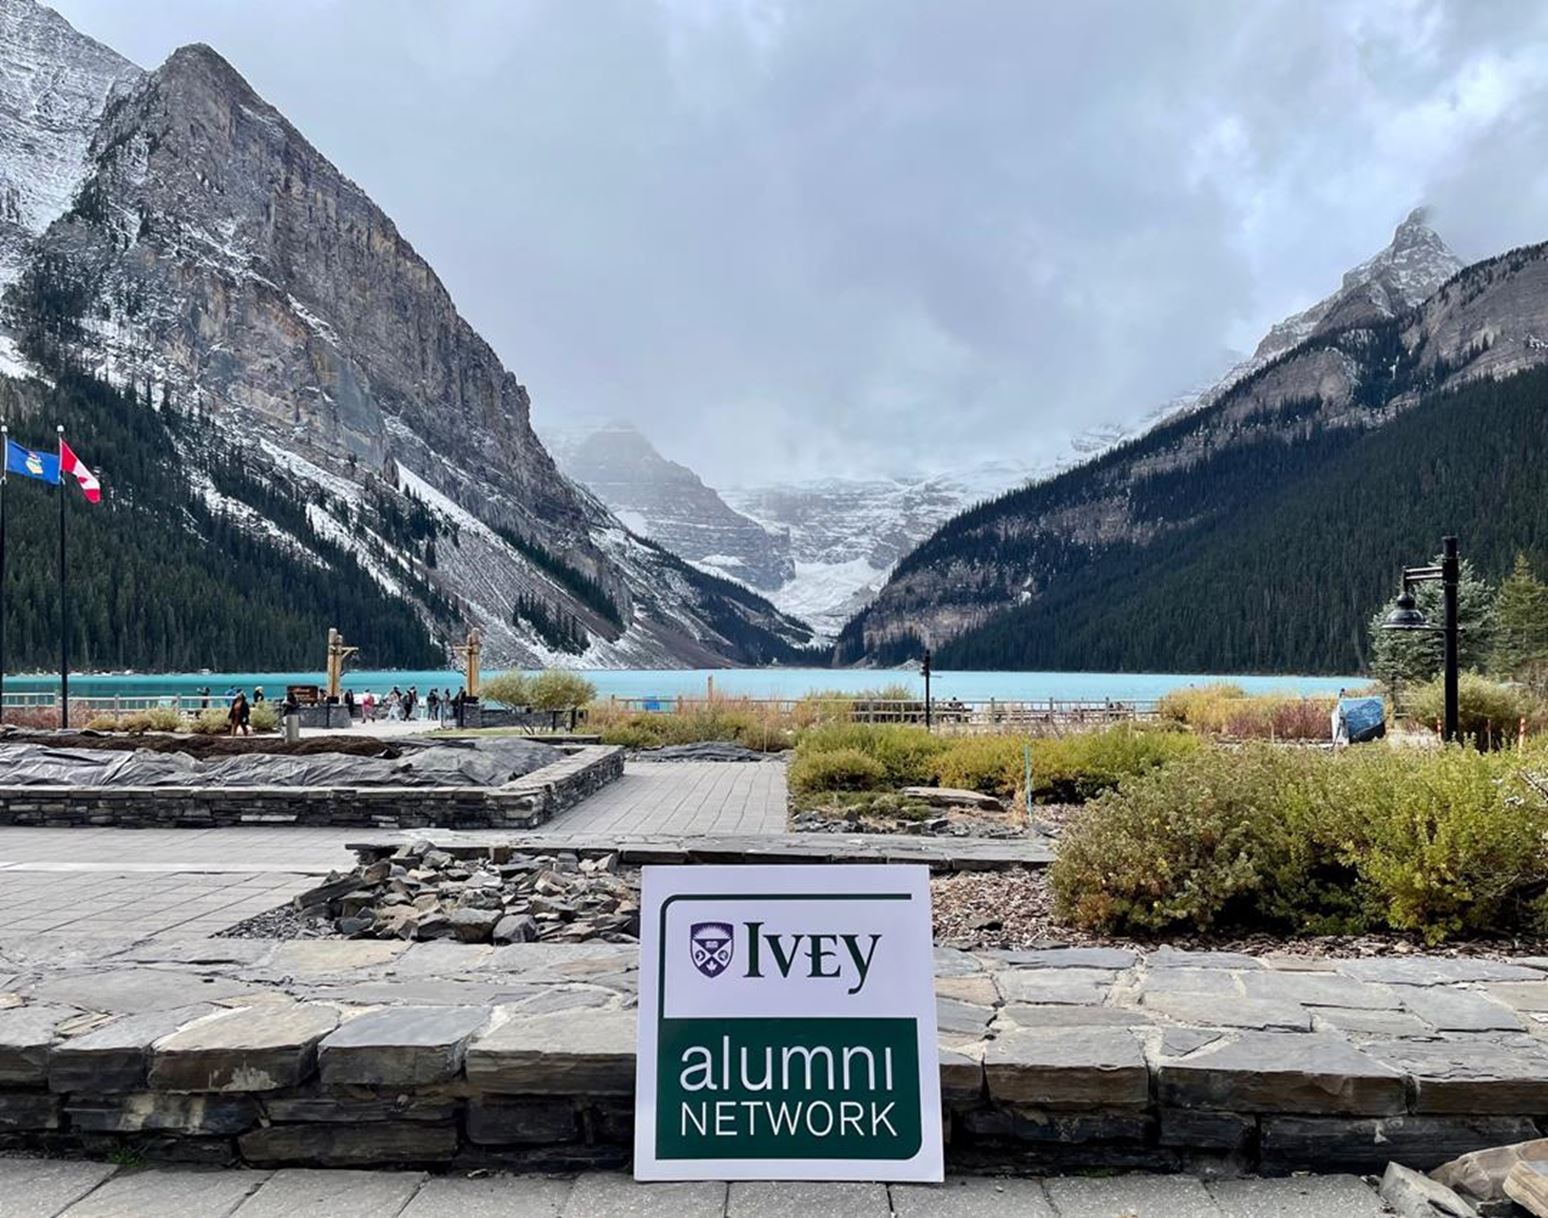 Image of Lake Louise and Ivey Alumni Network Sign